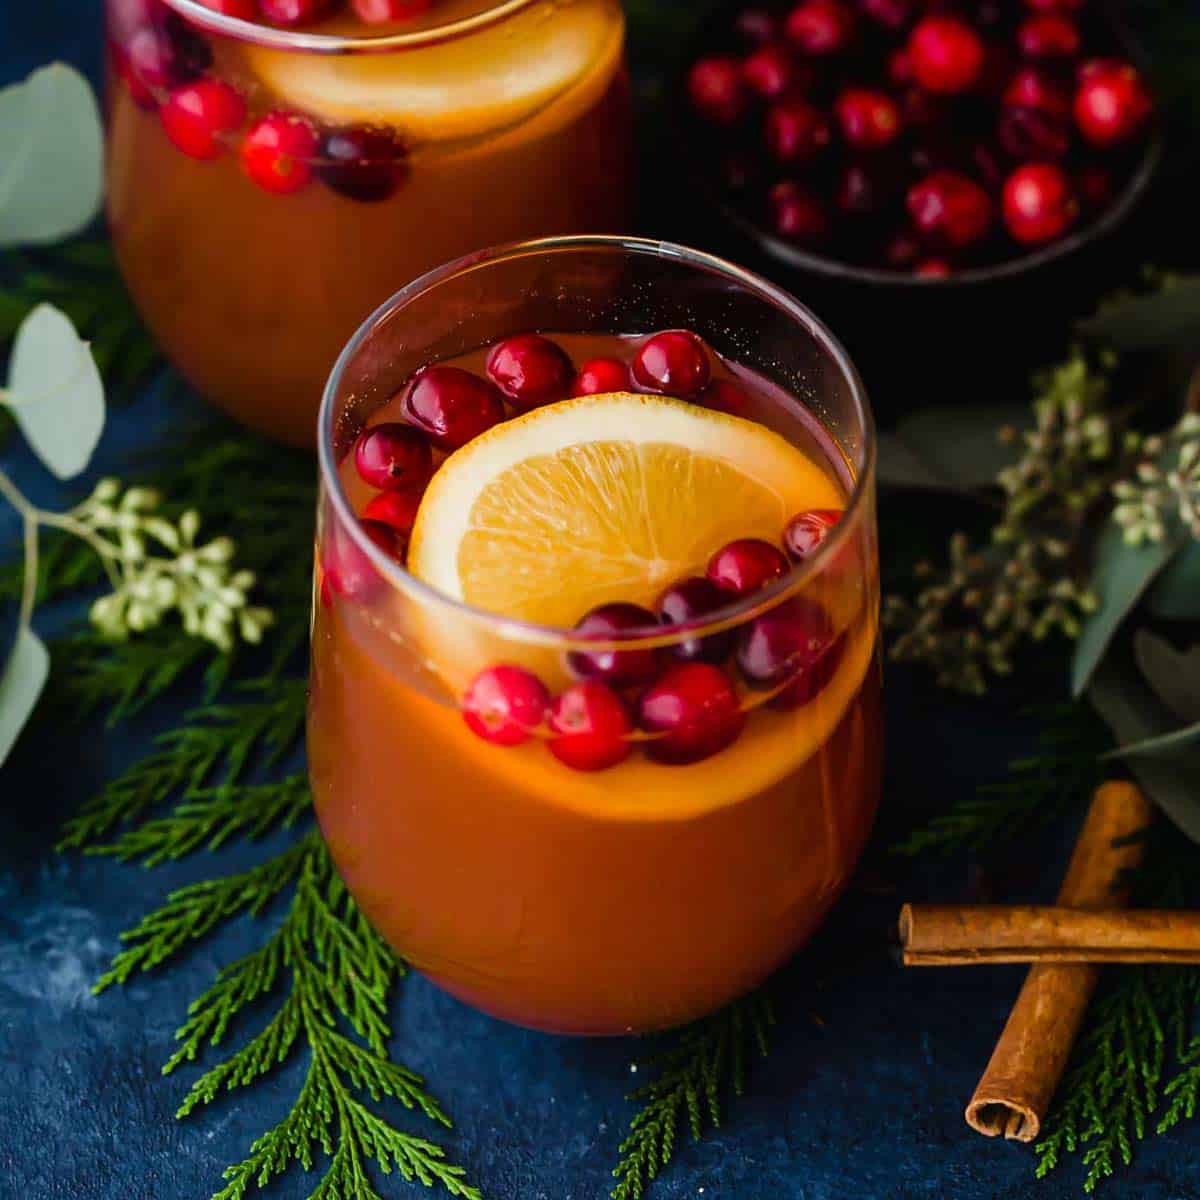 A glass cup with Cranberry Apple Cider, fresh cranberries, and an orange slice in it.